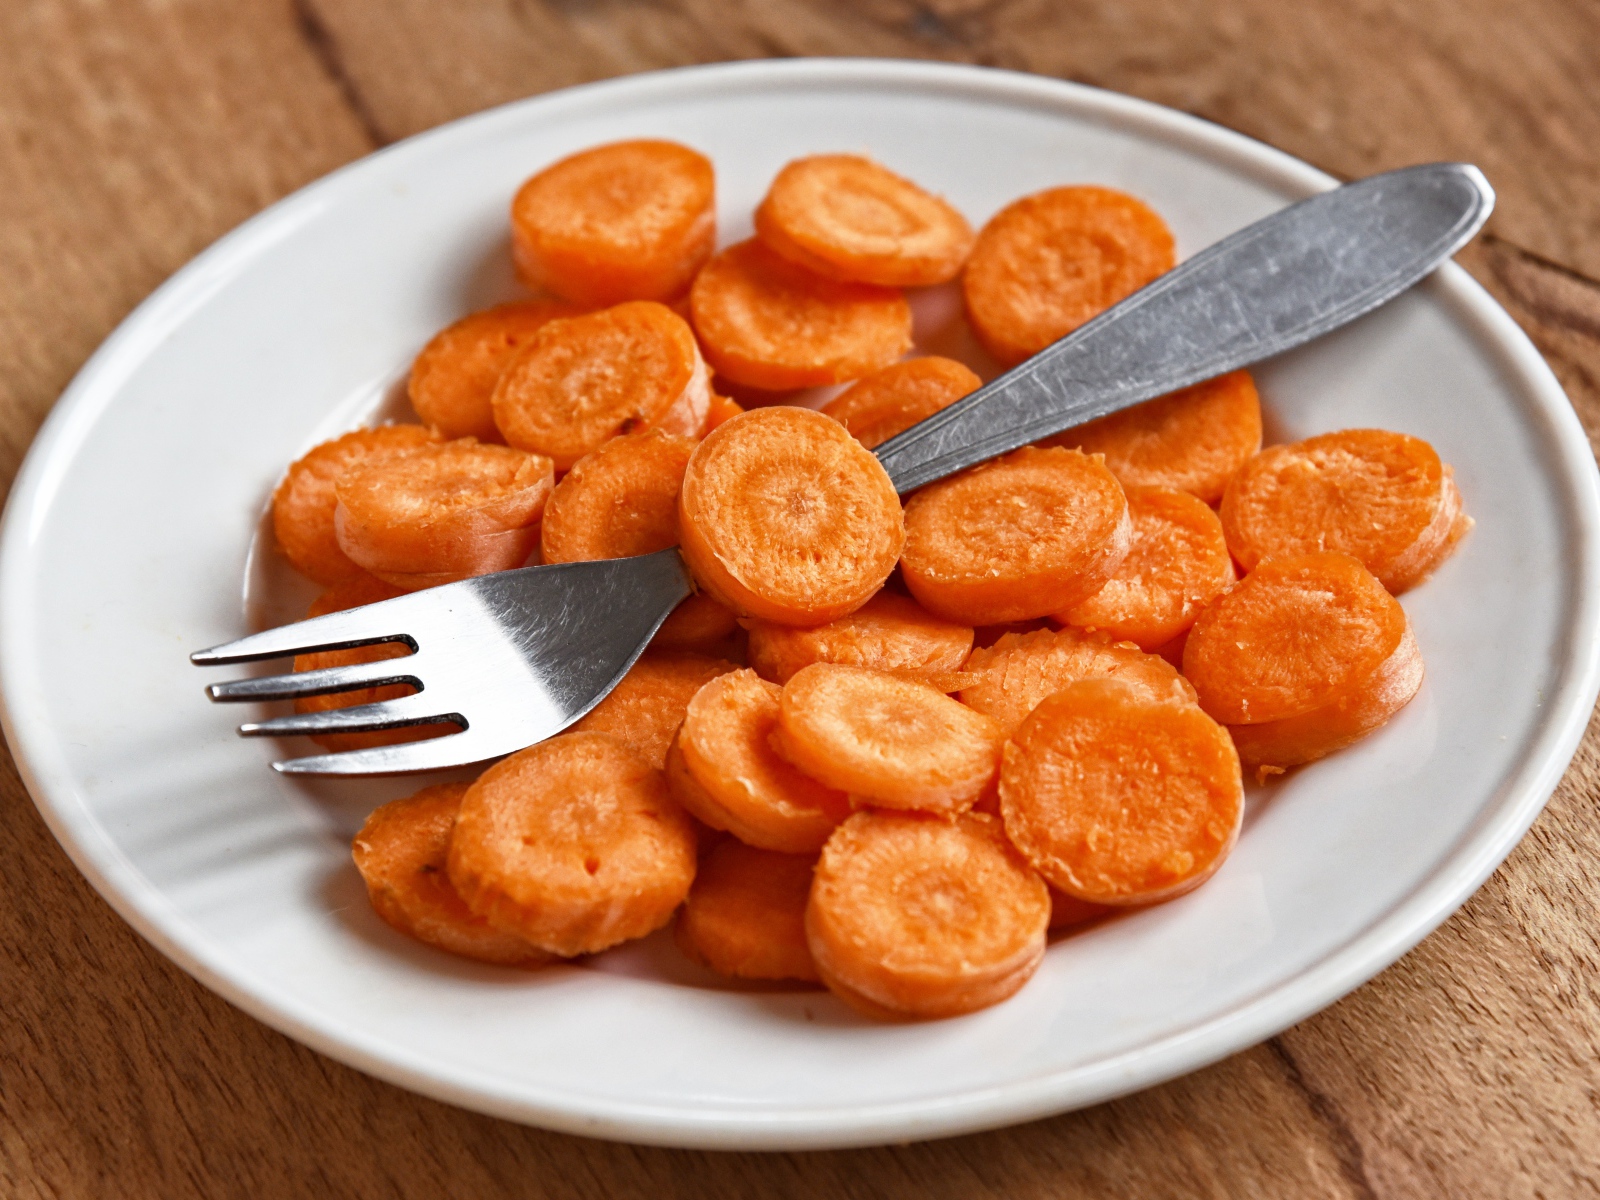 Carrot slices on a white plate with a fork